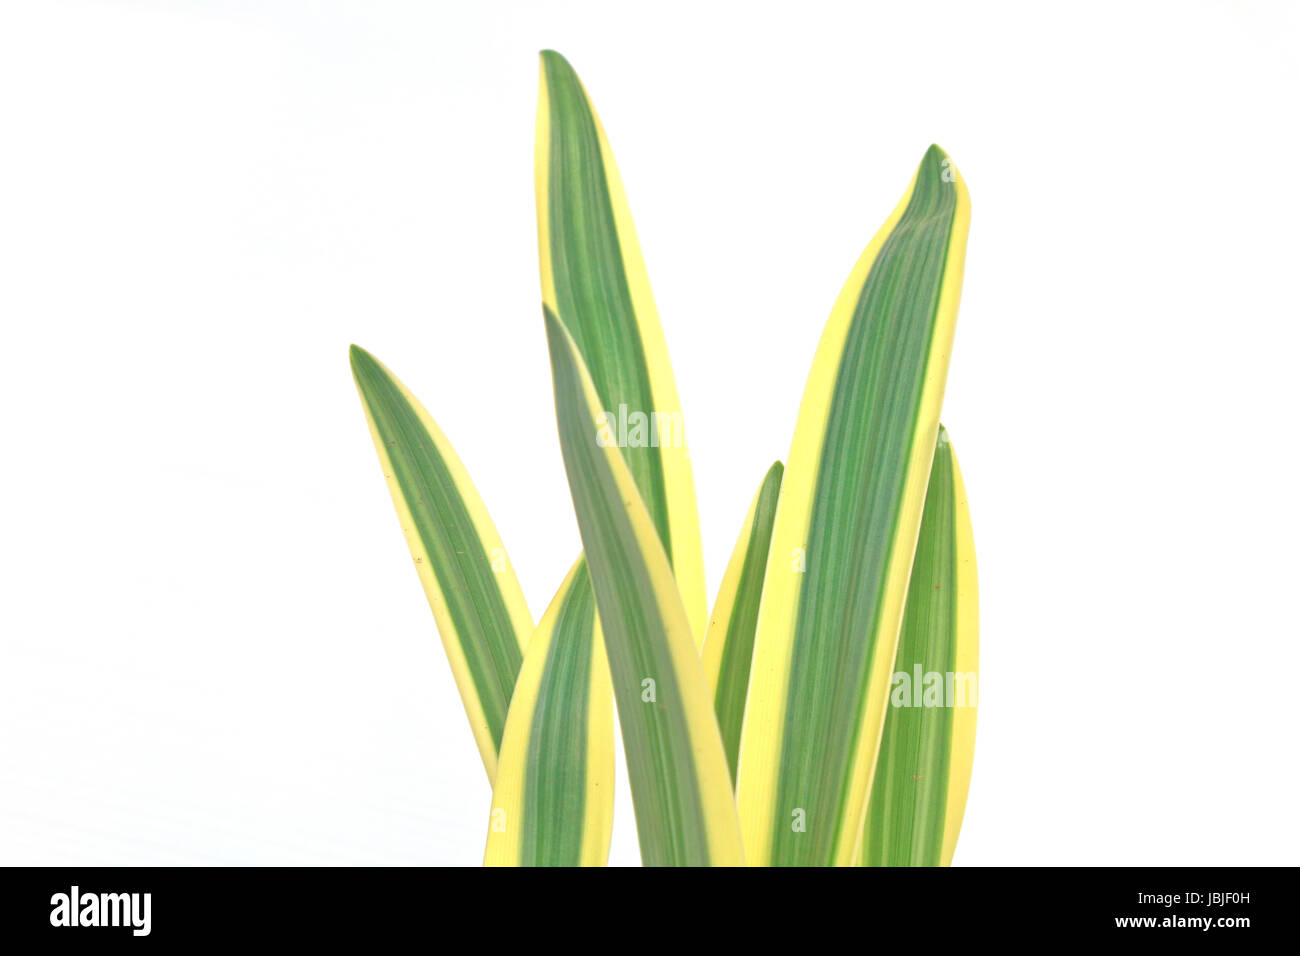 hymenocallis littoralis or Spider Lily leaf on background Stock Photo